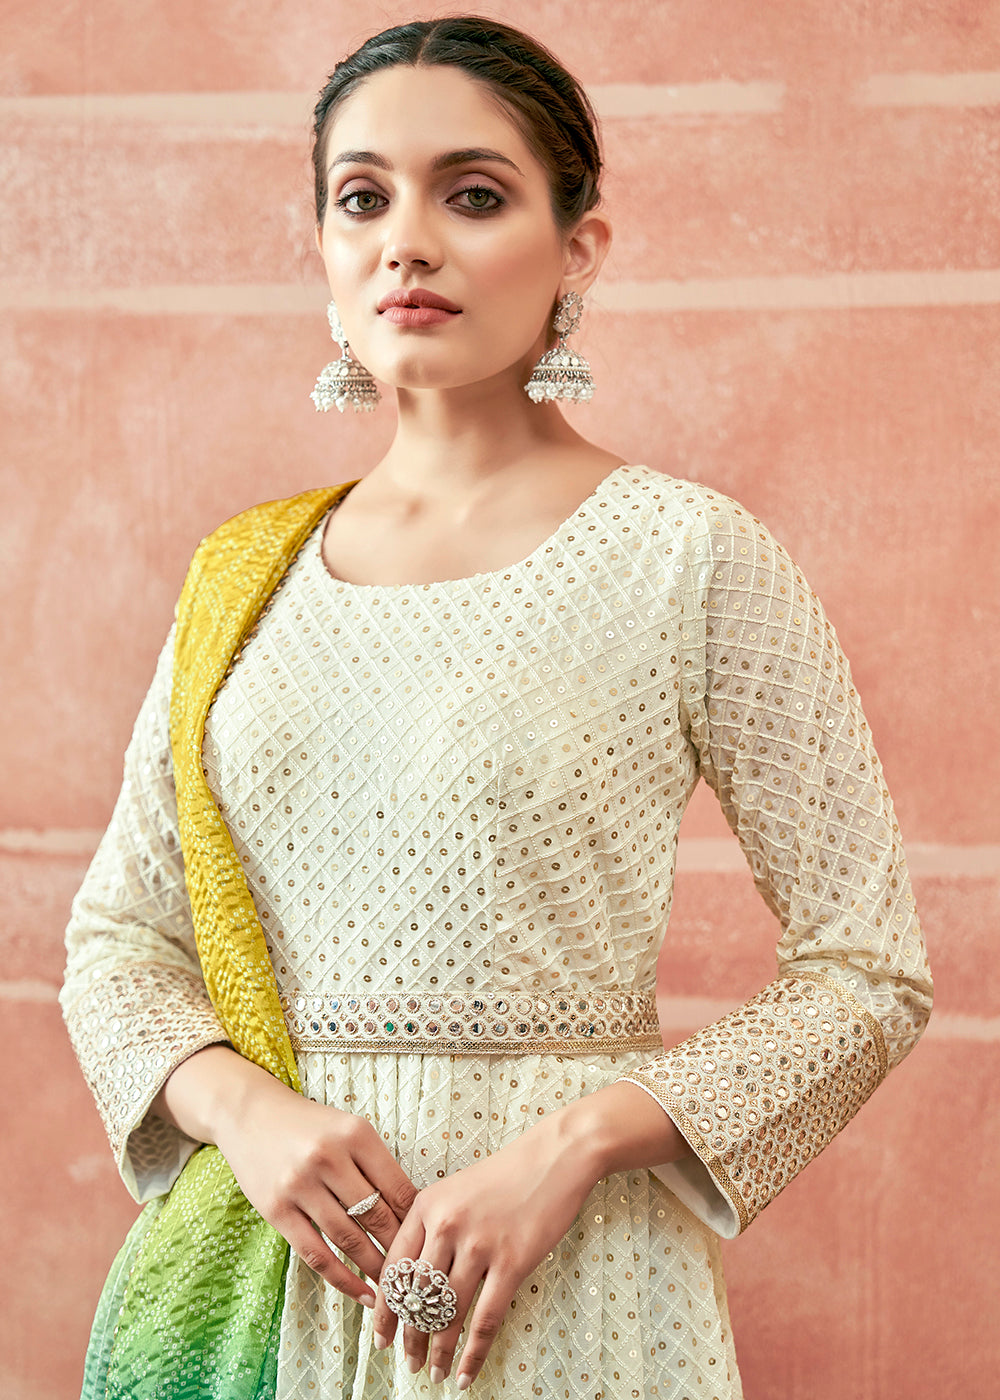 Buy Now Daisy White Traditional Anarkali with Yellow Ombre Bandhni Dupatta Online in USA, UK, Australia, New Zealand, Canada & Worldwide at Empress Clothing.